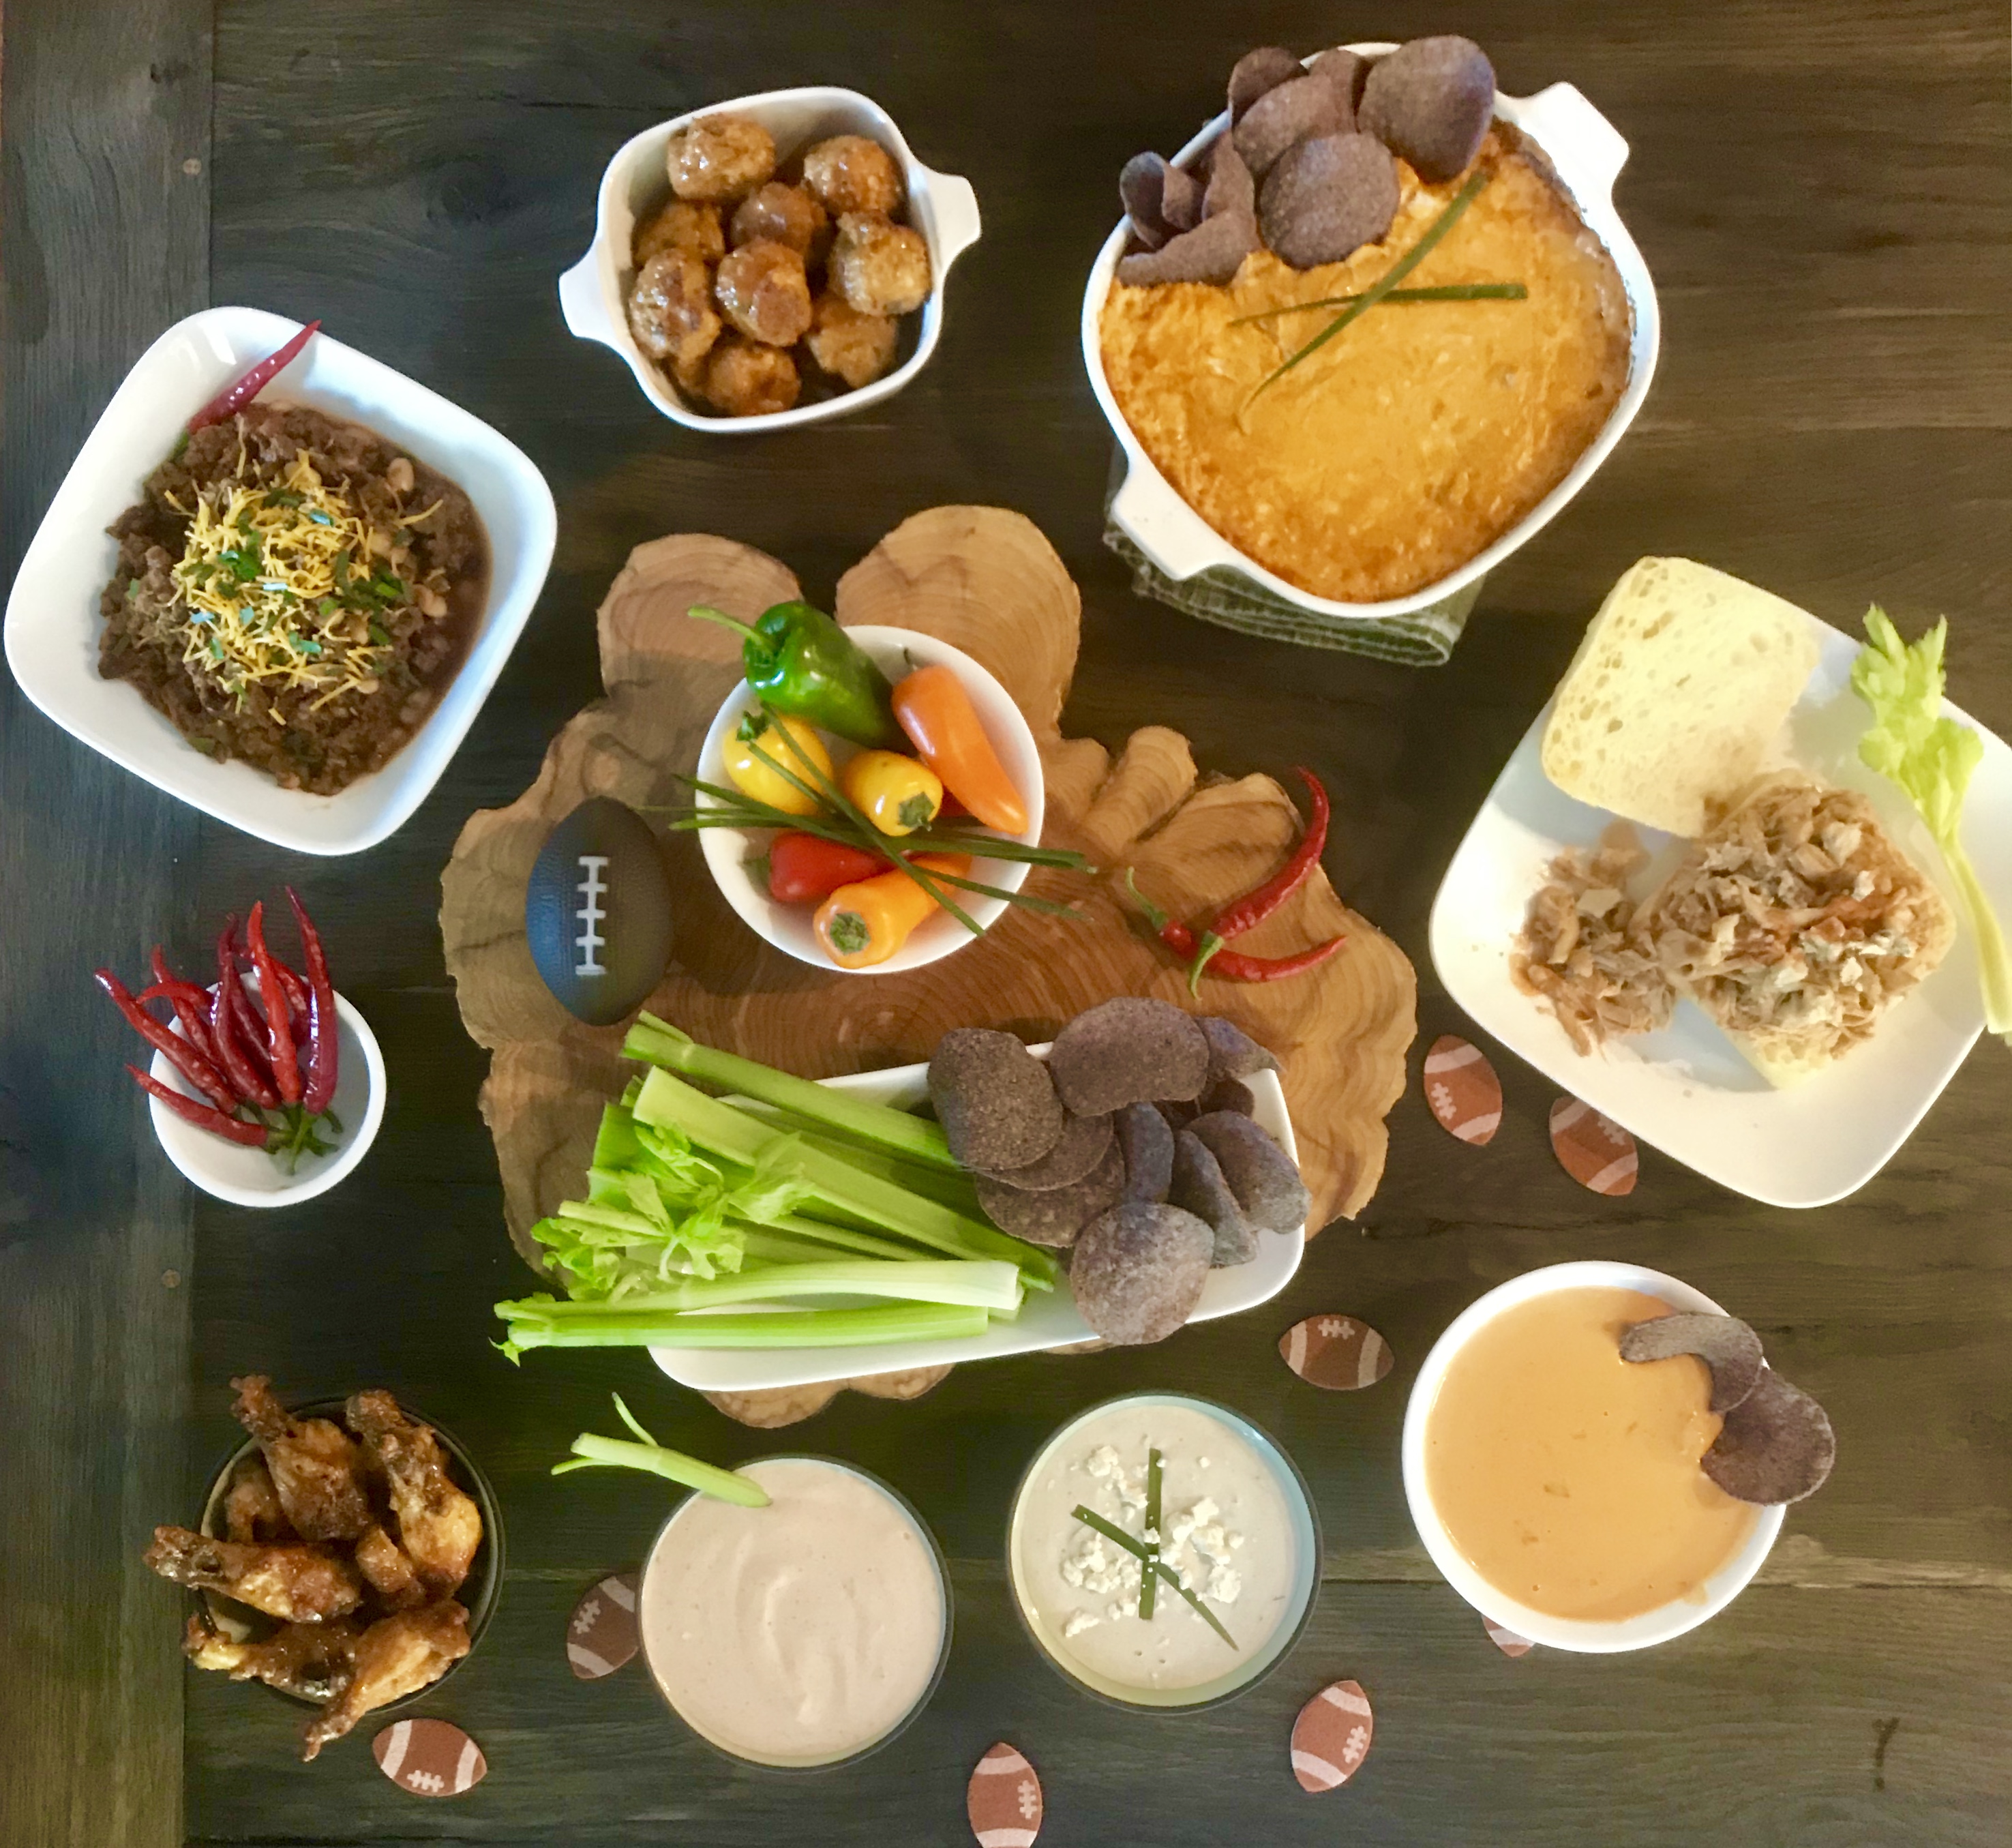 spread of various foods taken at an aerial angle